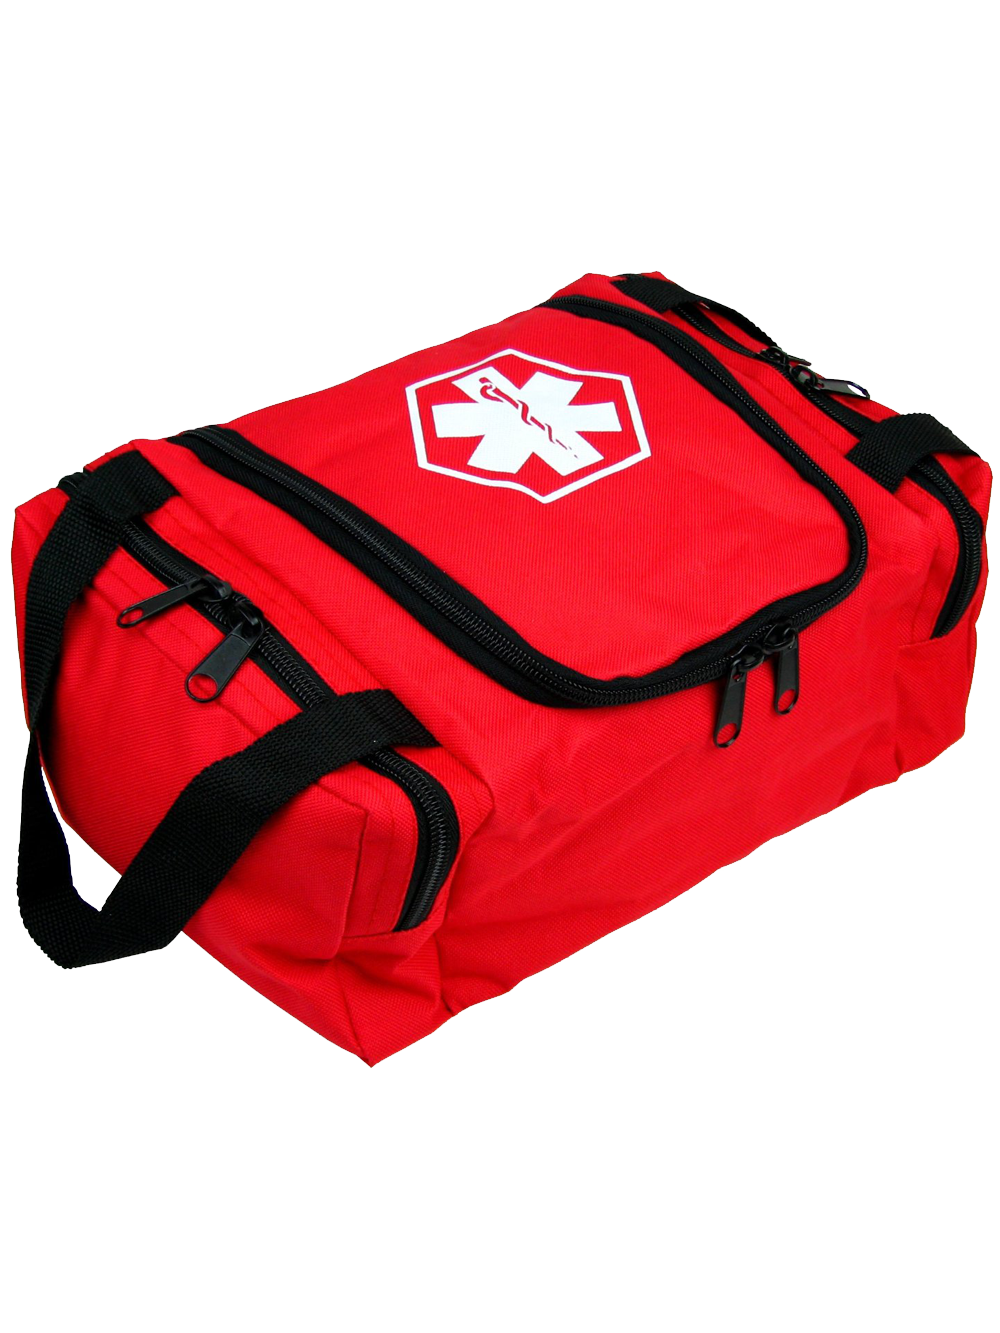 First Aid Kit Free PNG Image